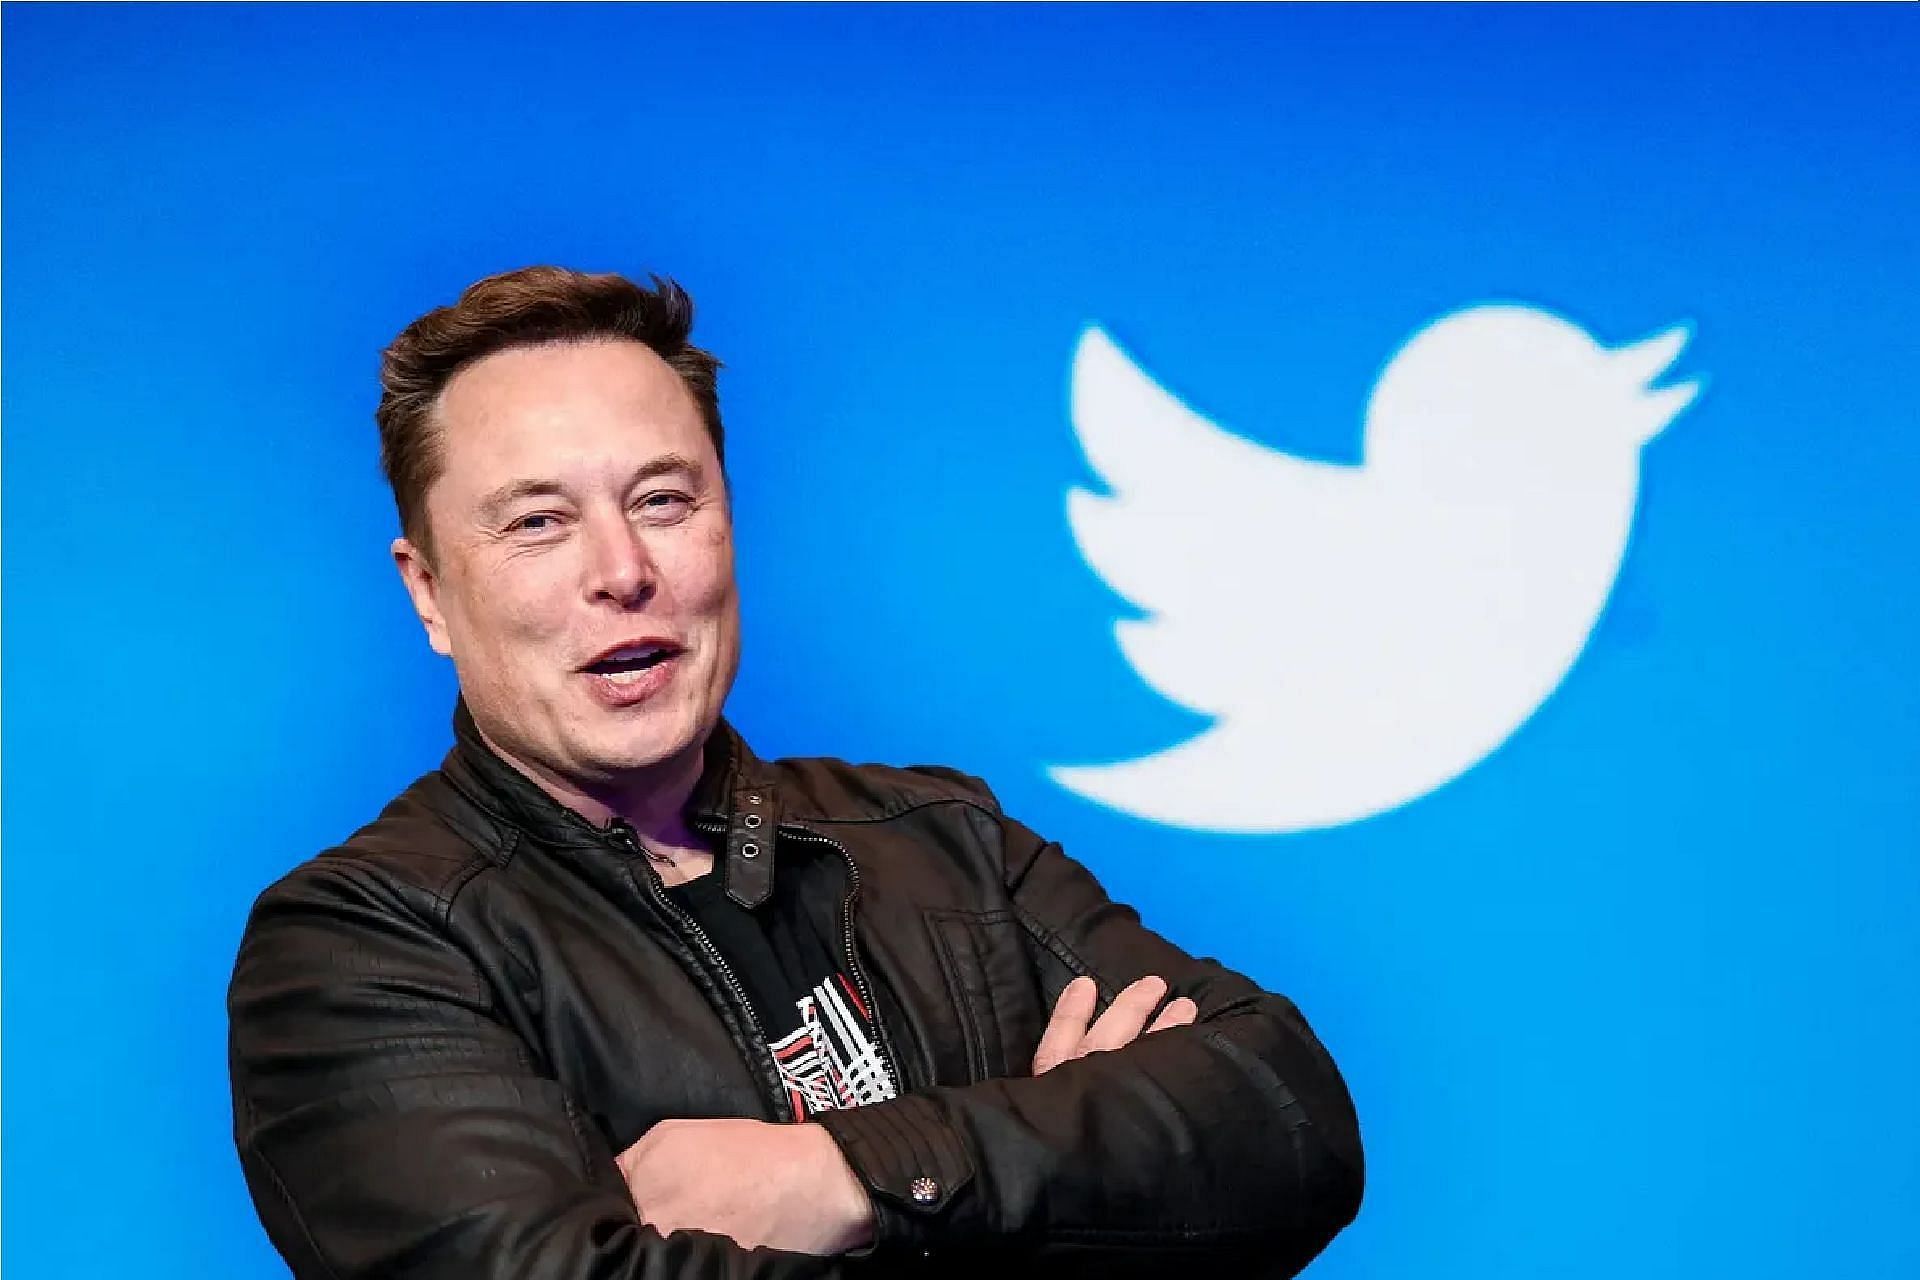 Tesla and Twitter CEO has been sued for $56 billion by one of Tesla&rsquo;s investors, Richard Tornetta. (Image via Twitter)